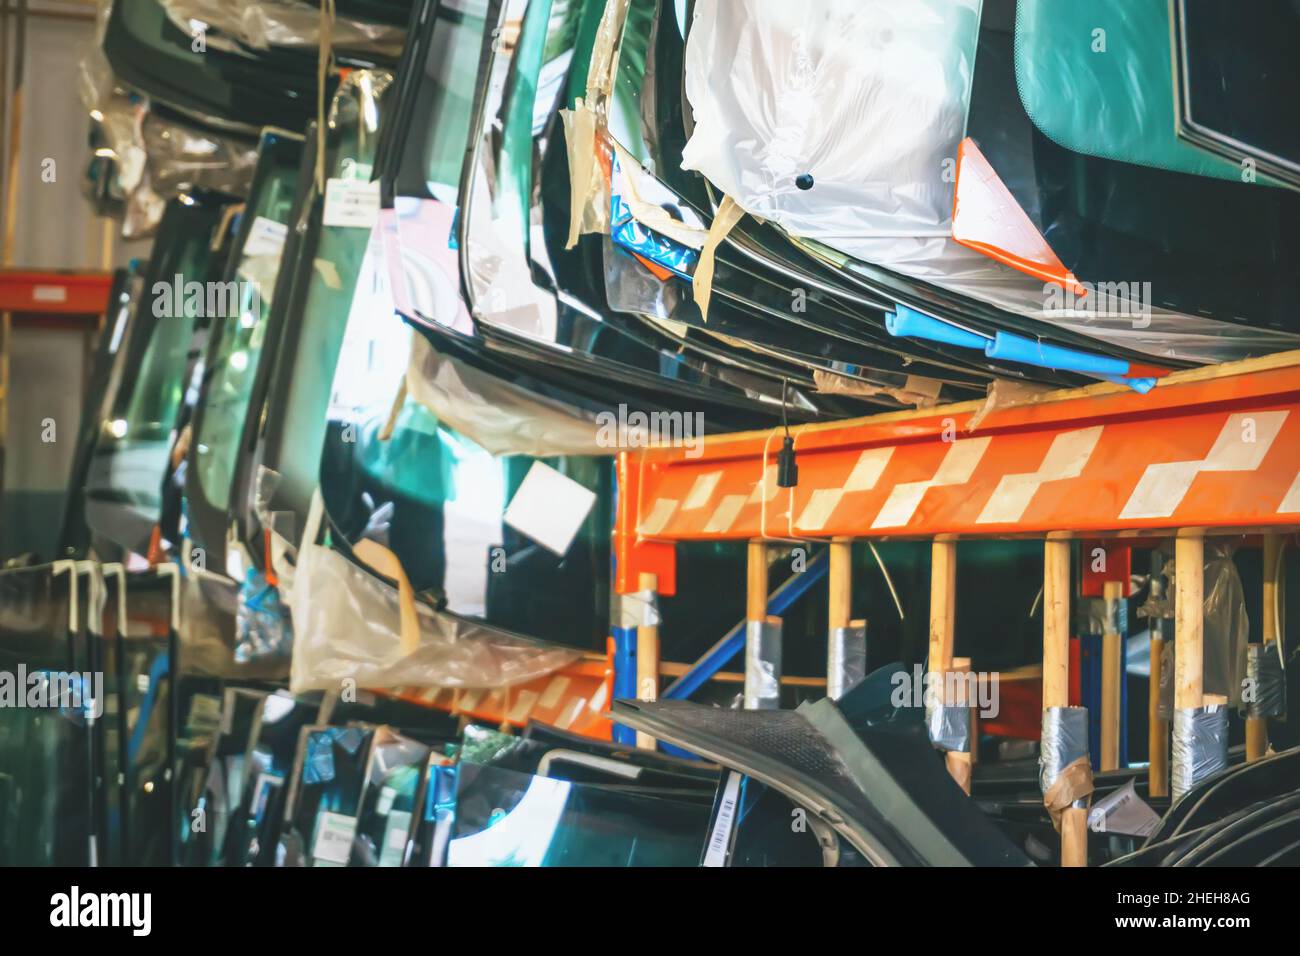 Many windshields for cars on service station shelves ready to install or replace broken glass with cars. Stock Photo